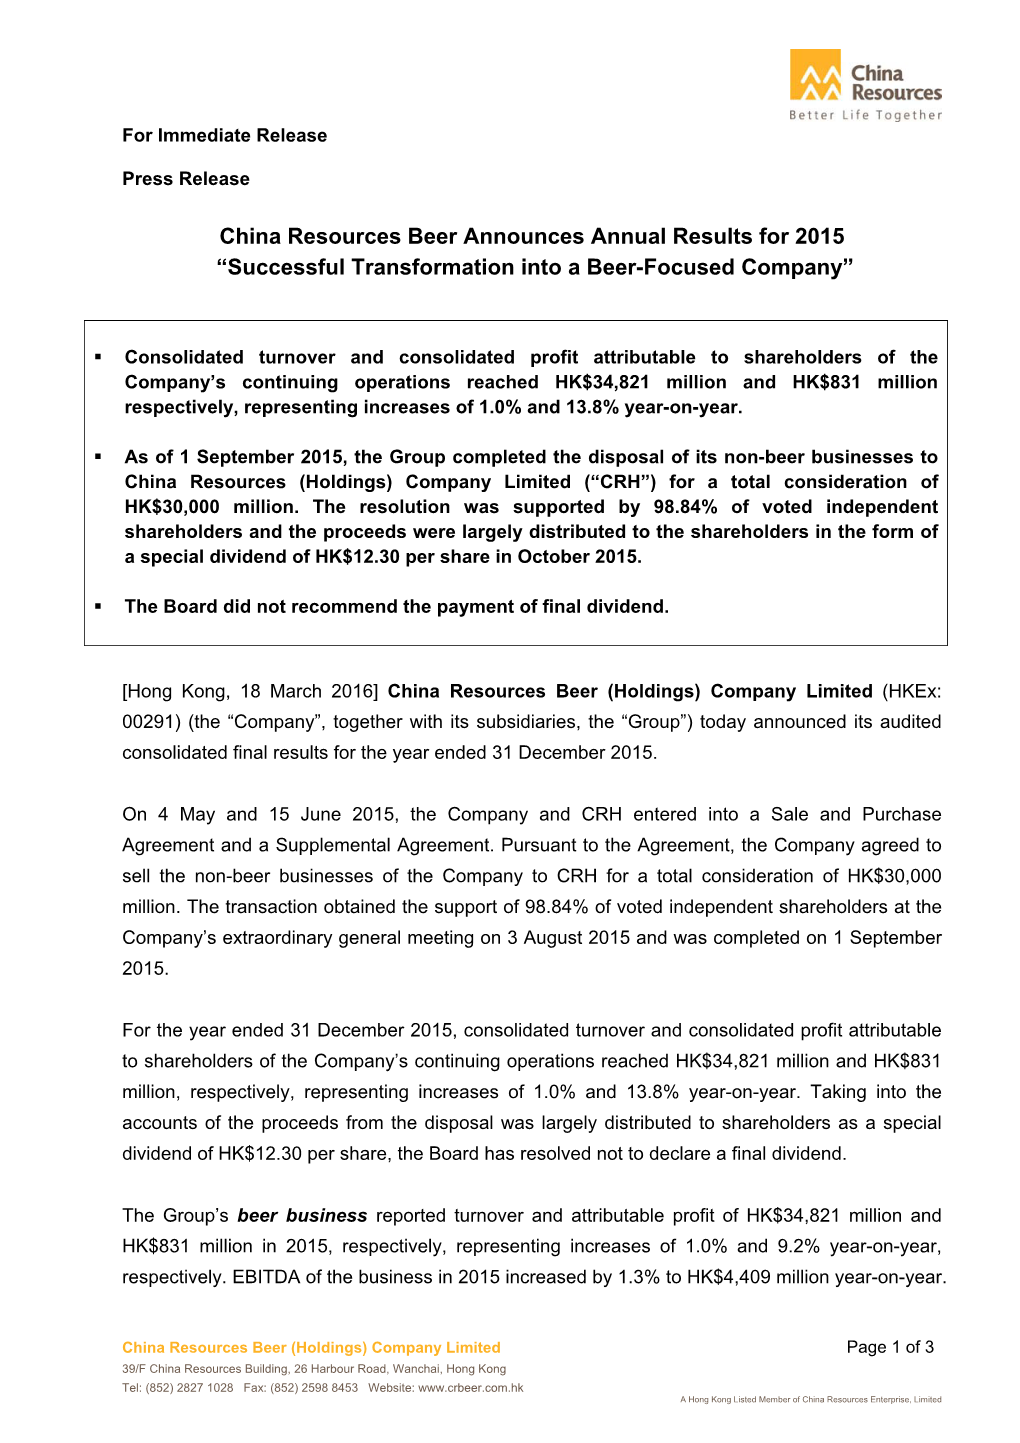 China Resources Beer Announces Annual Results for 2015 “Successful Transformation Into a Beer-Focused Company”